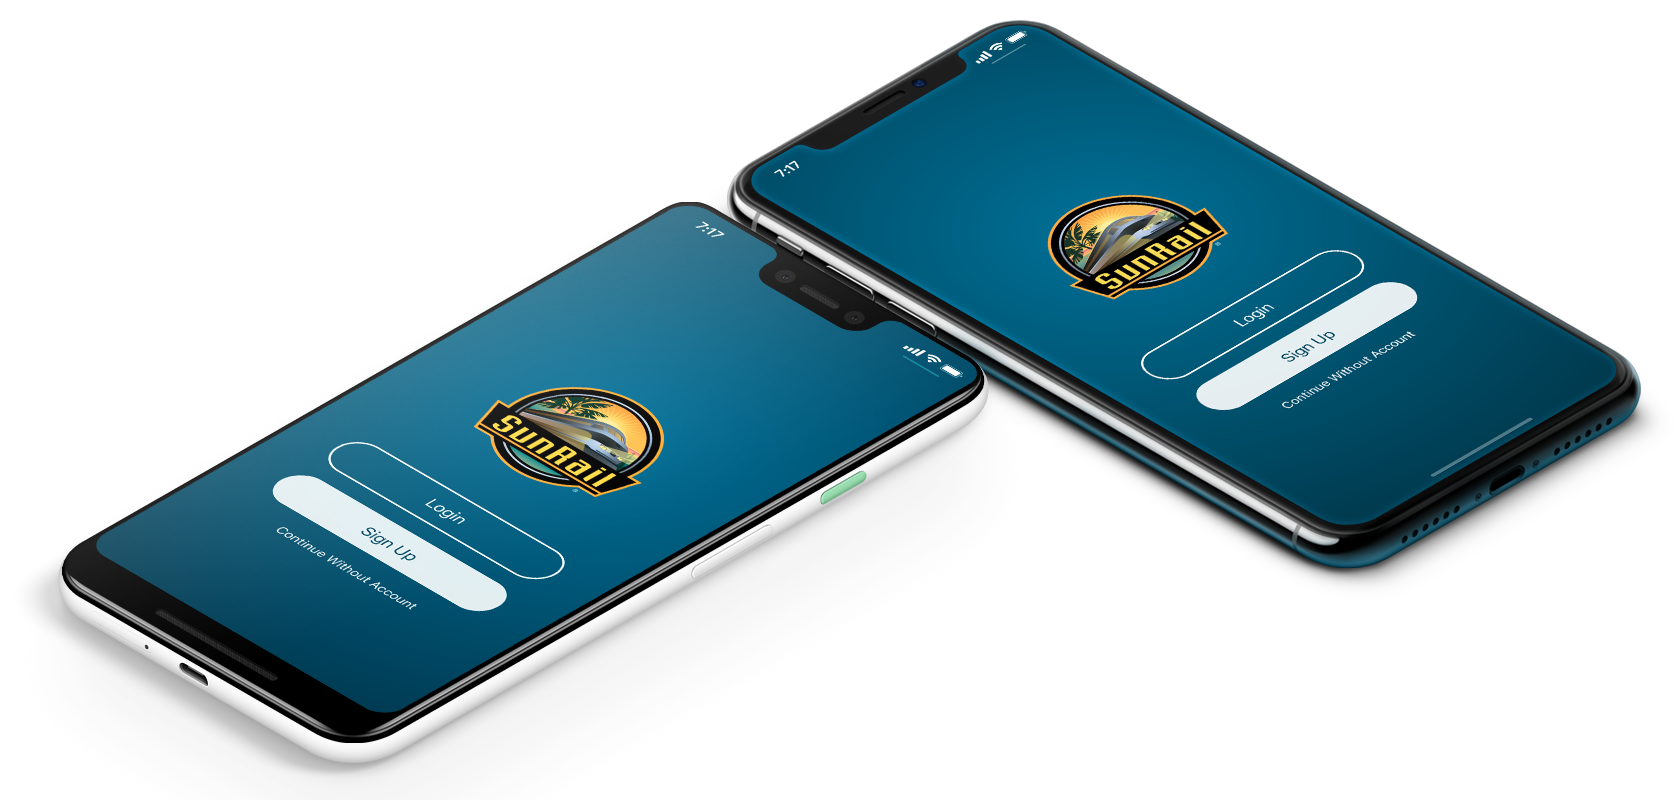 SunRail App Displayed on iPhone and Google Pixel.